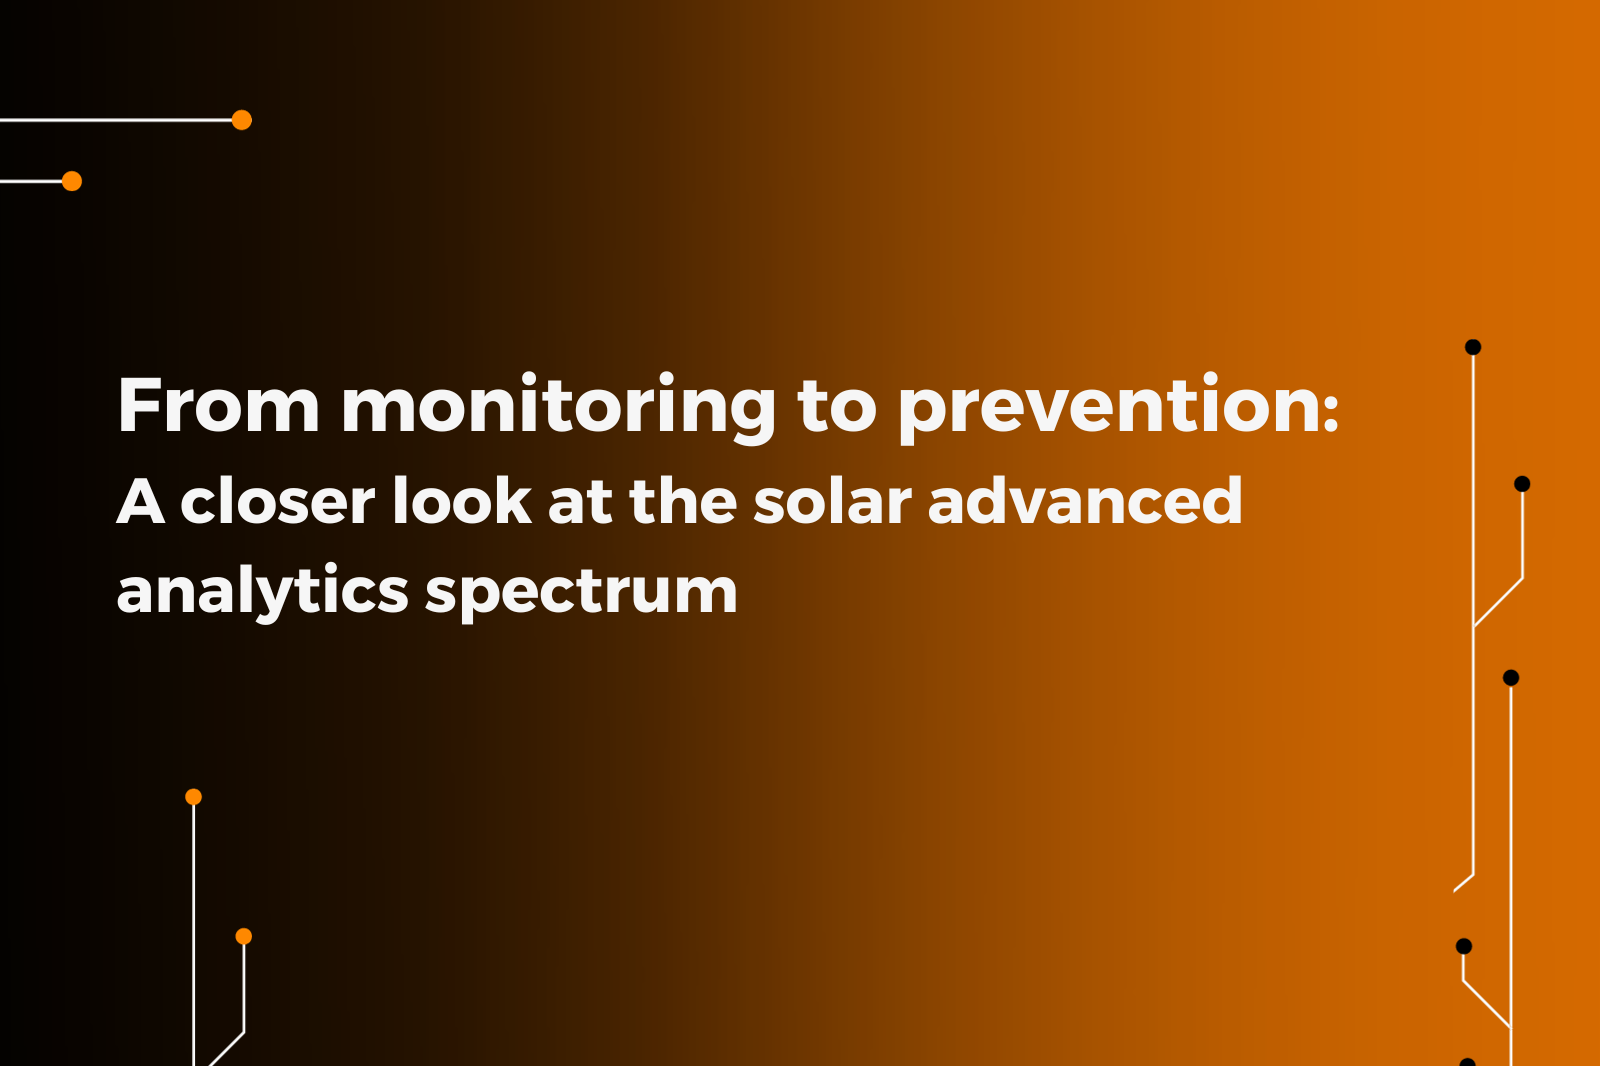 From monitoring to prevention: A closer look at the solar advanced analytics spectrum